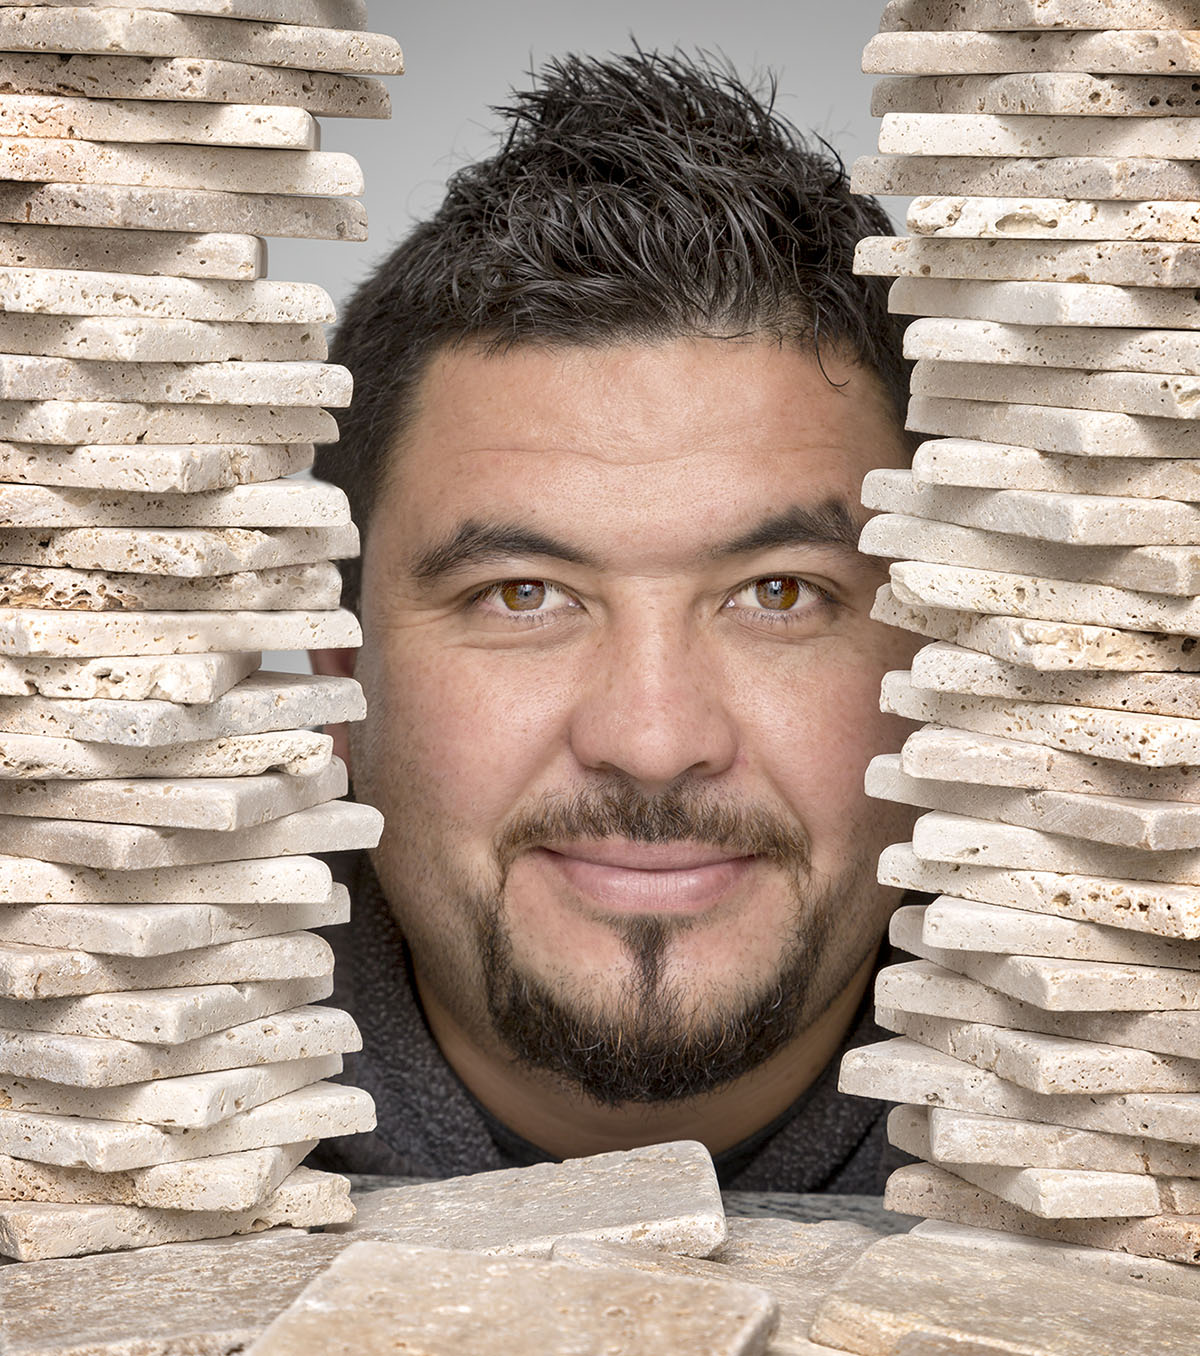 Marcos NuÃ±ez is a skilled craftsman specializing in ceramic tile and wood flooring.